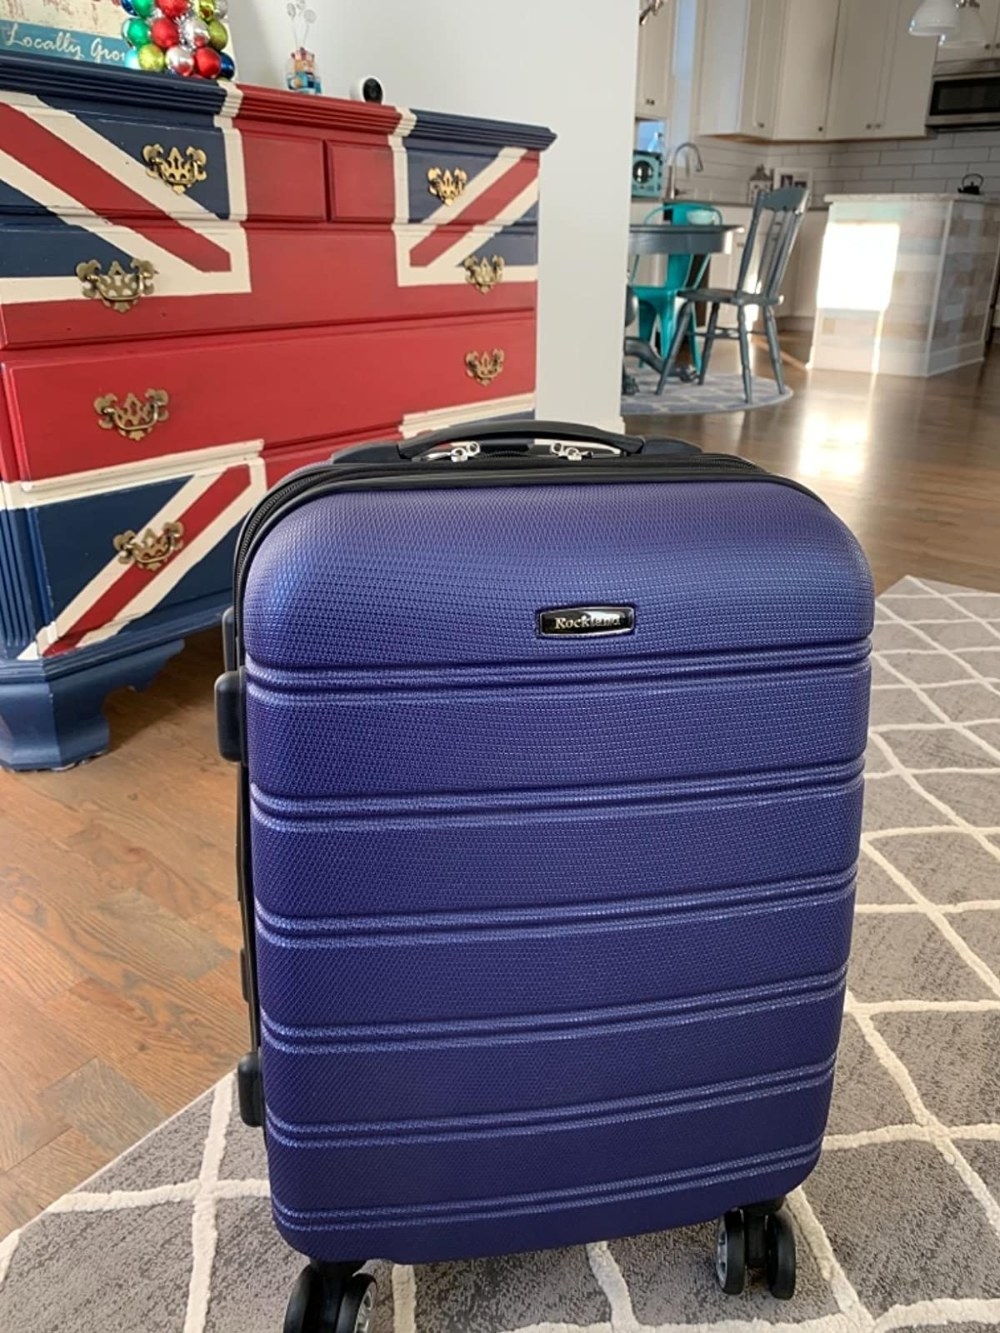 The suitcase in the color Blue